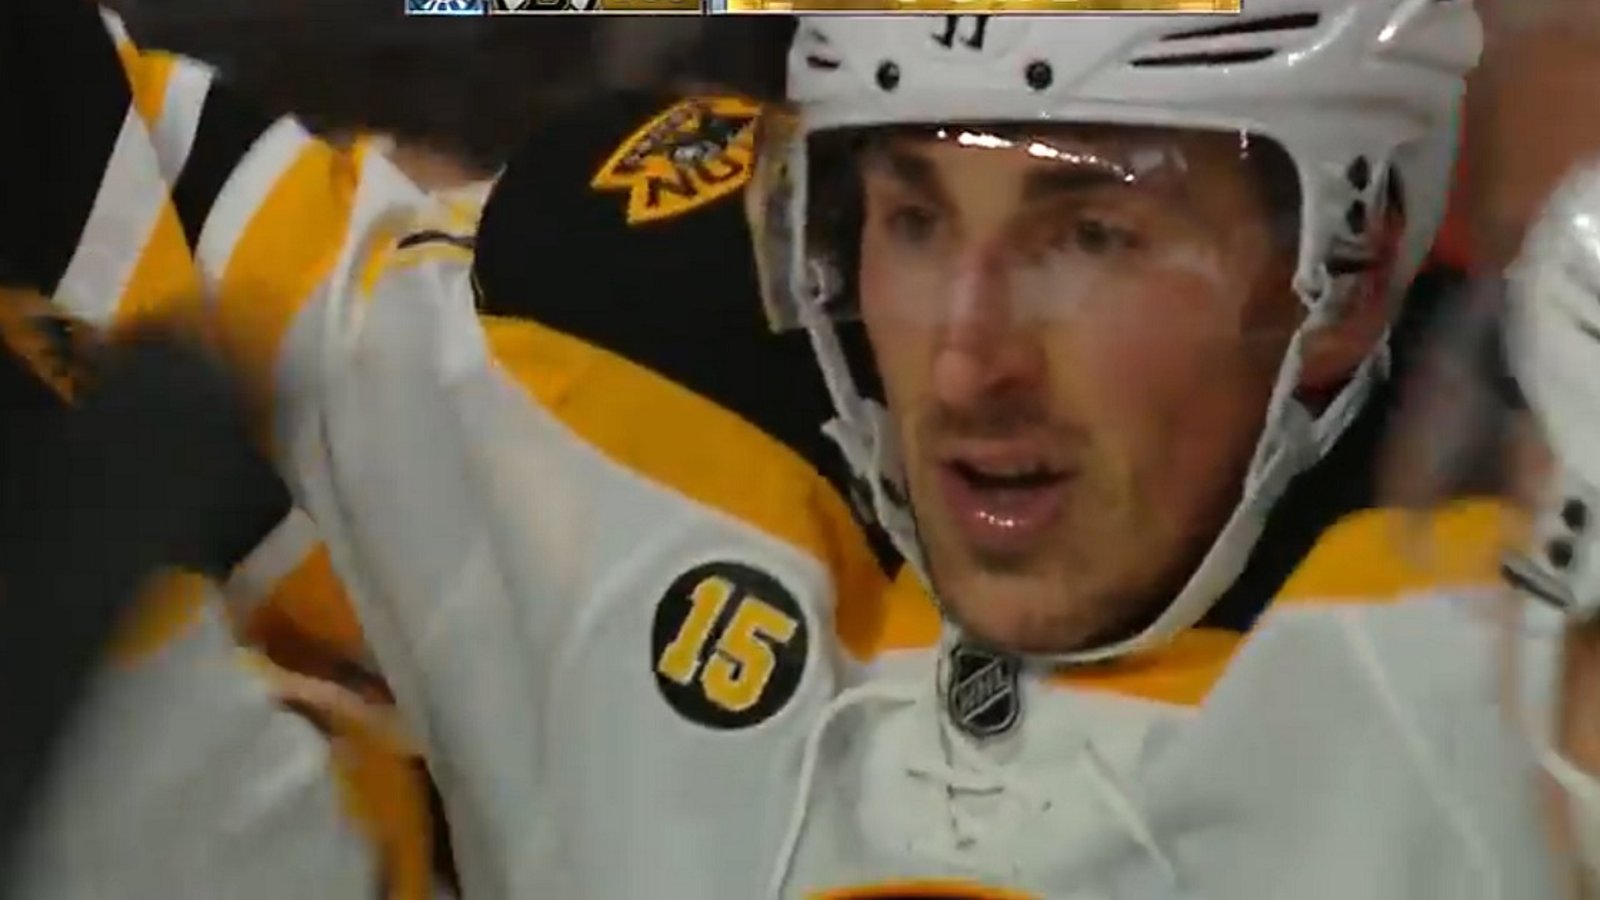 Brad Marchand stuns the Senators with a late game winning goal.